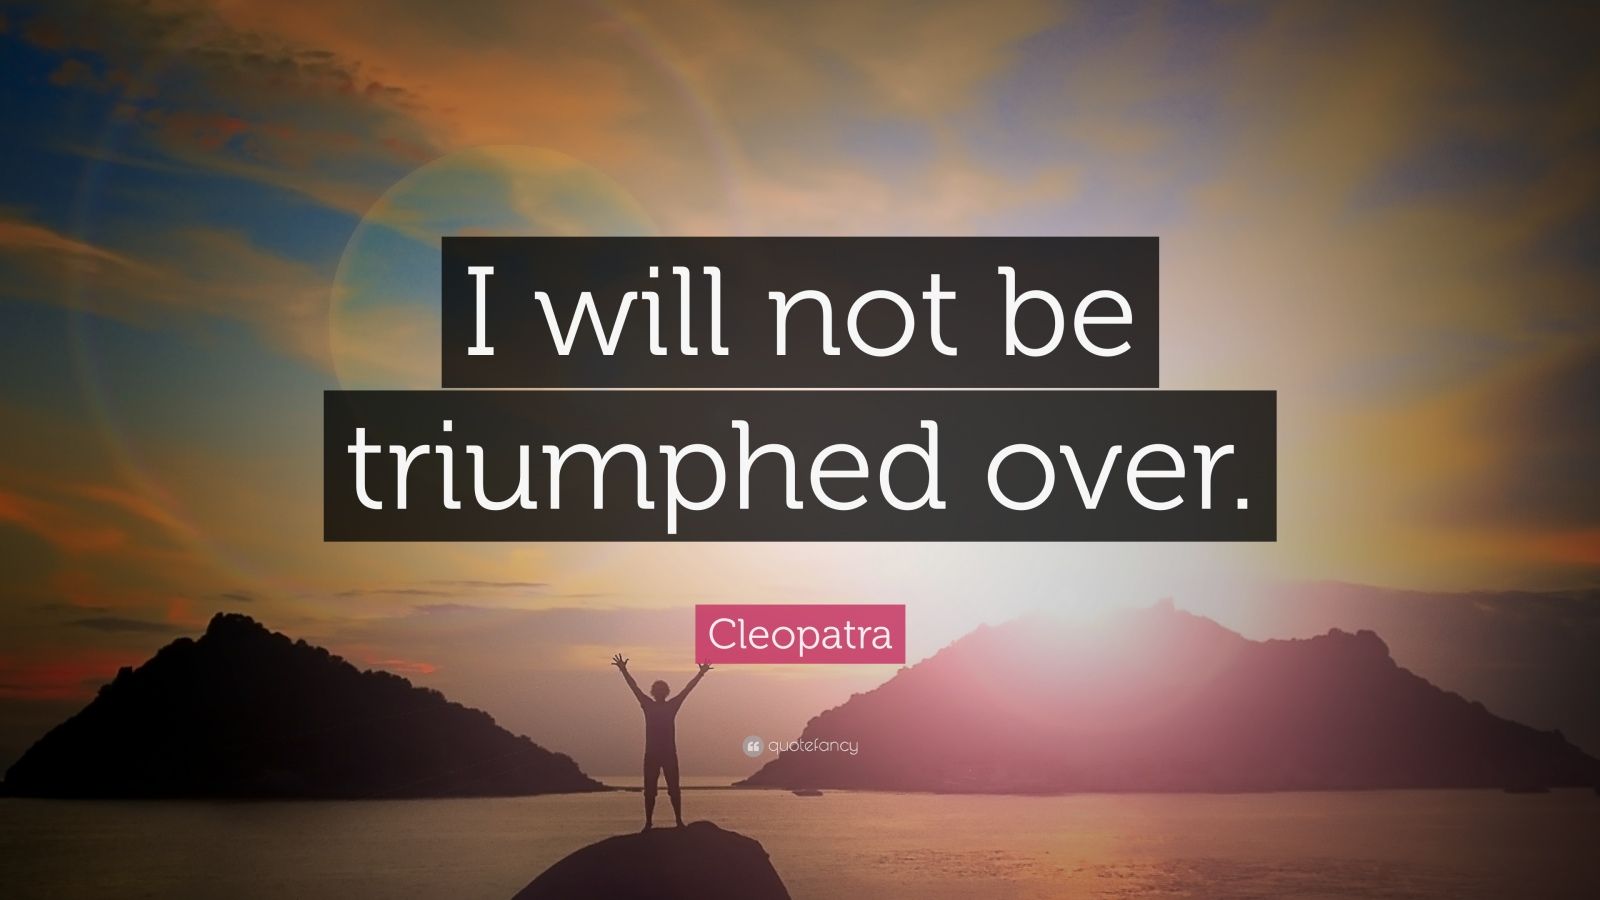 Cleopatra Quotes (8 wallpapers) - Quotefancy